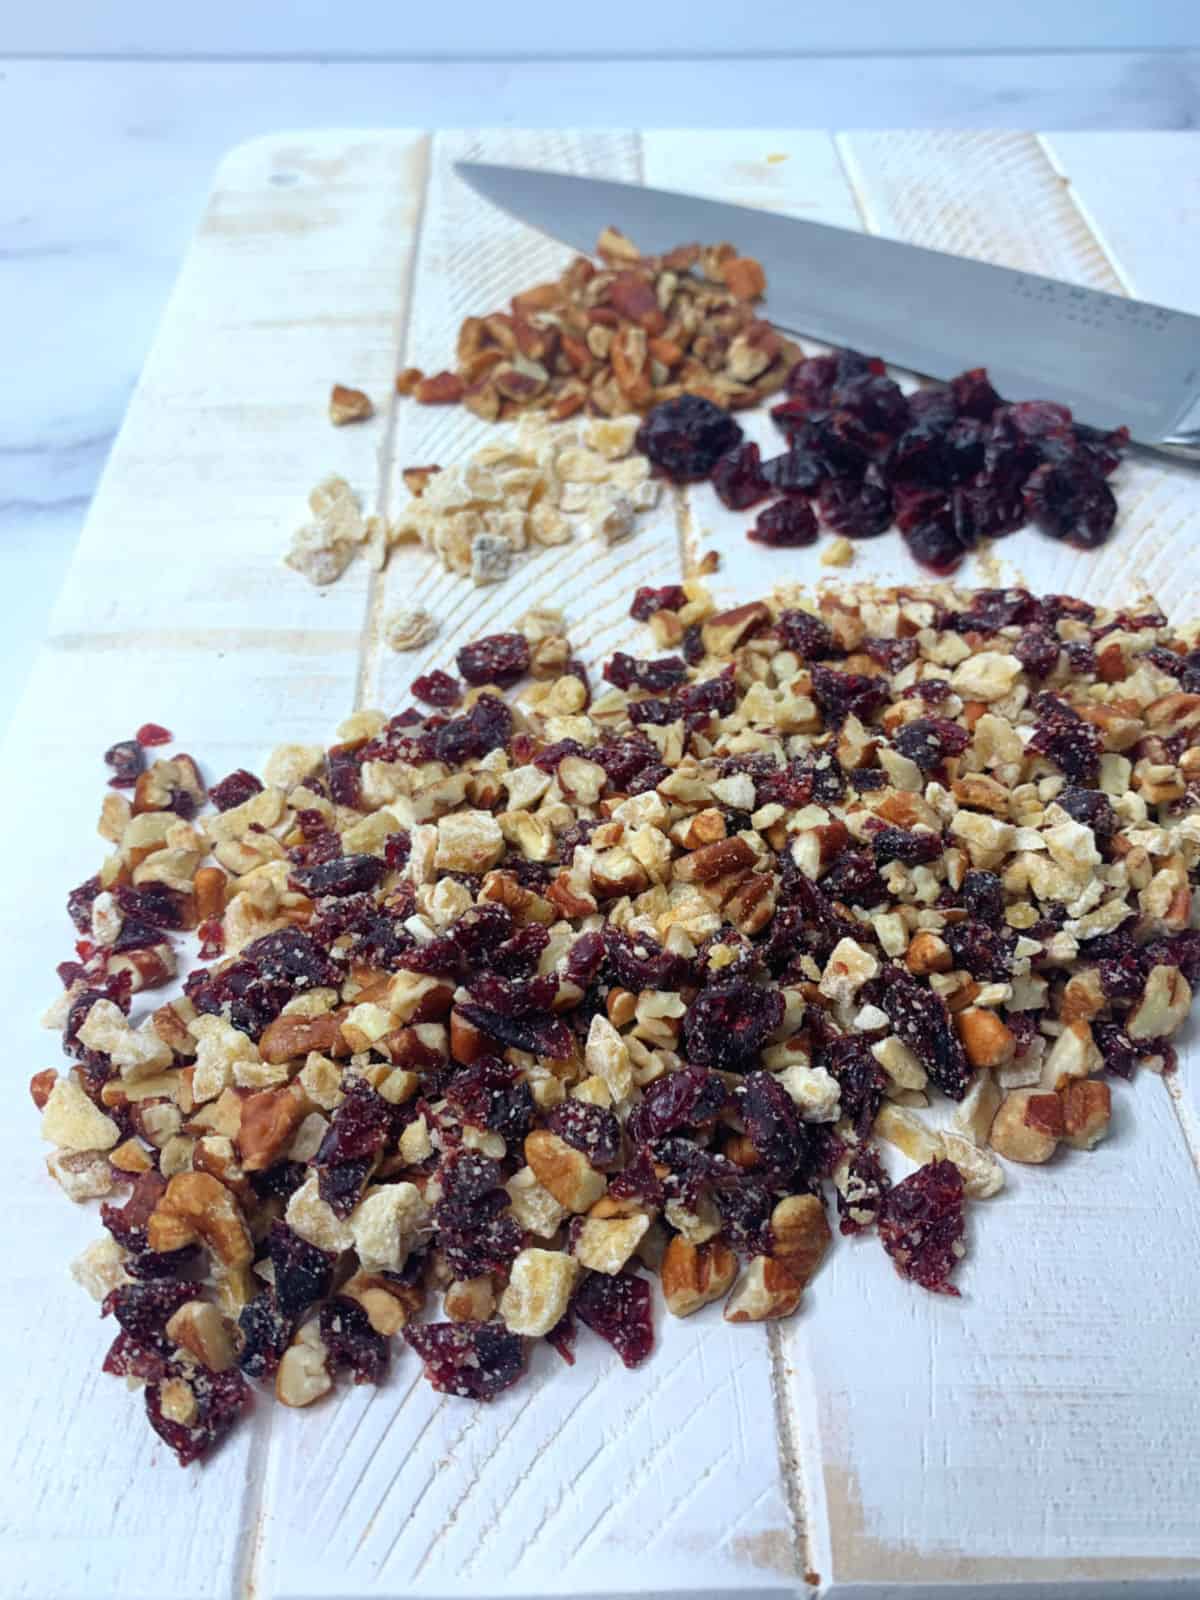 Chopping ginger, cranberries and pecans all together on a white board.